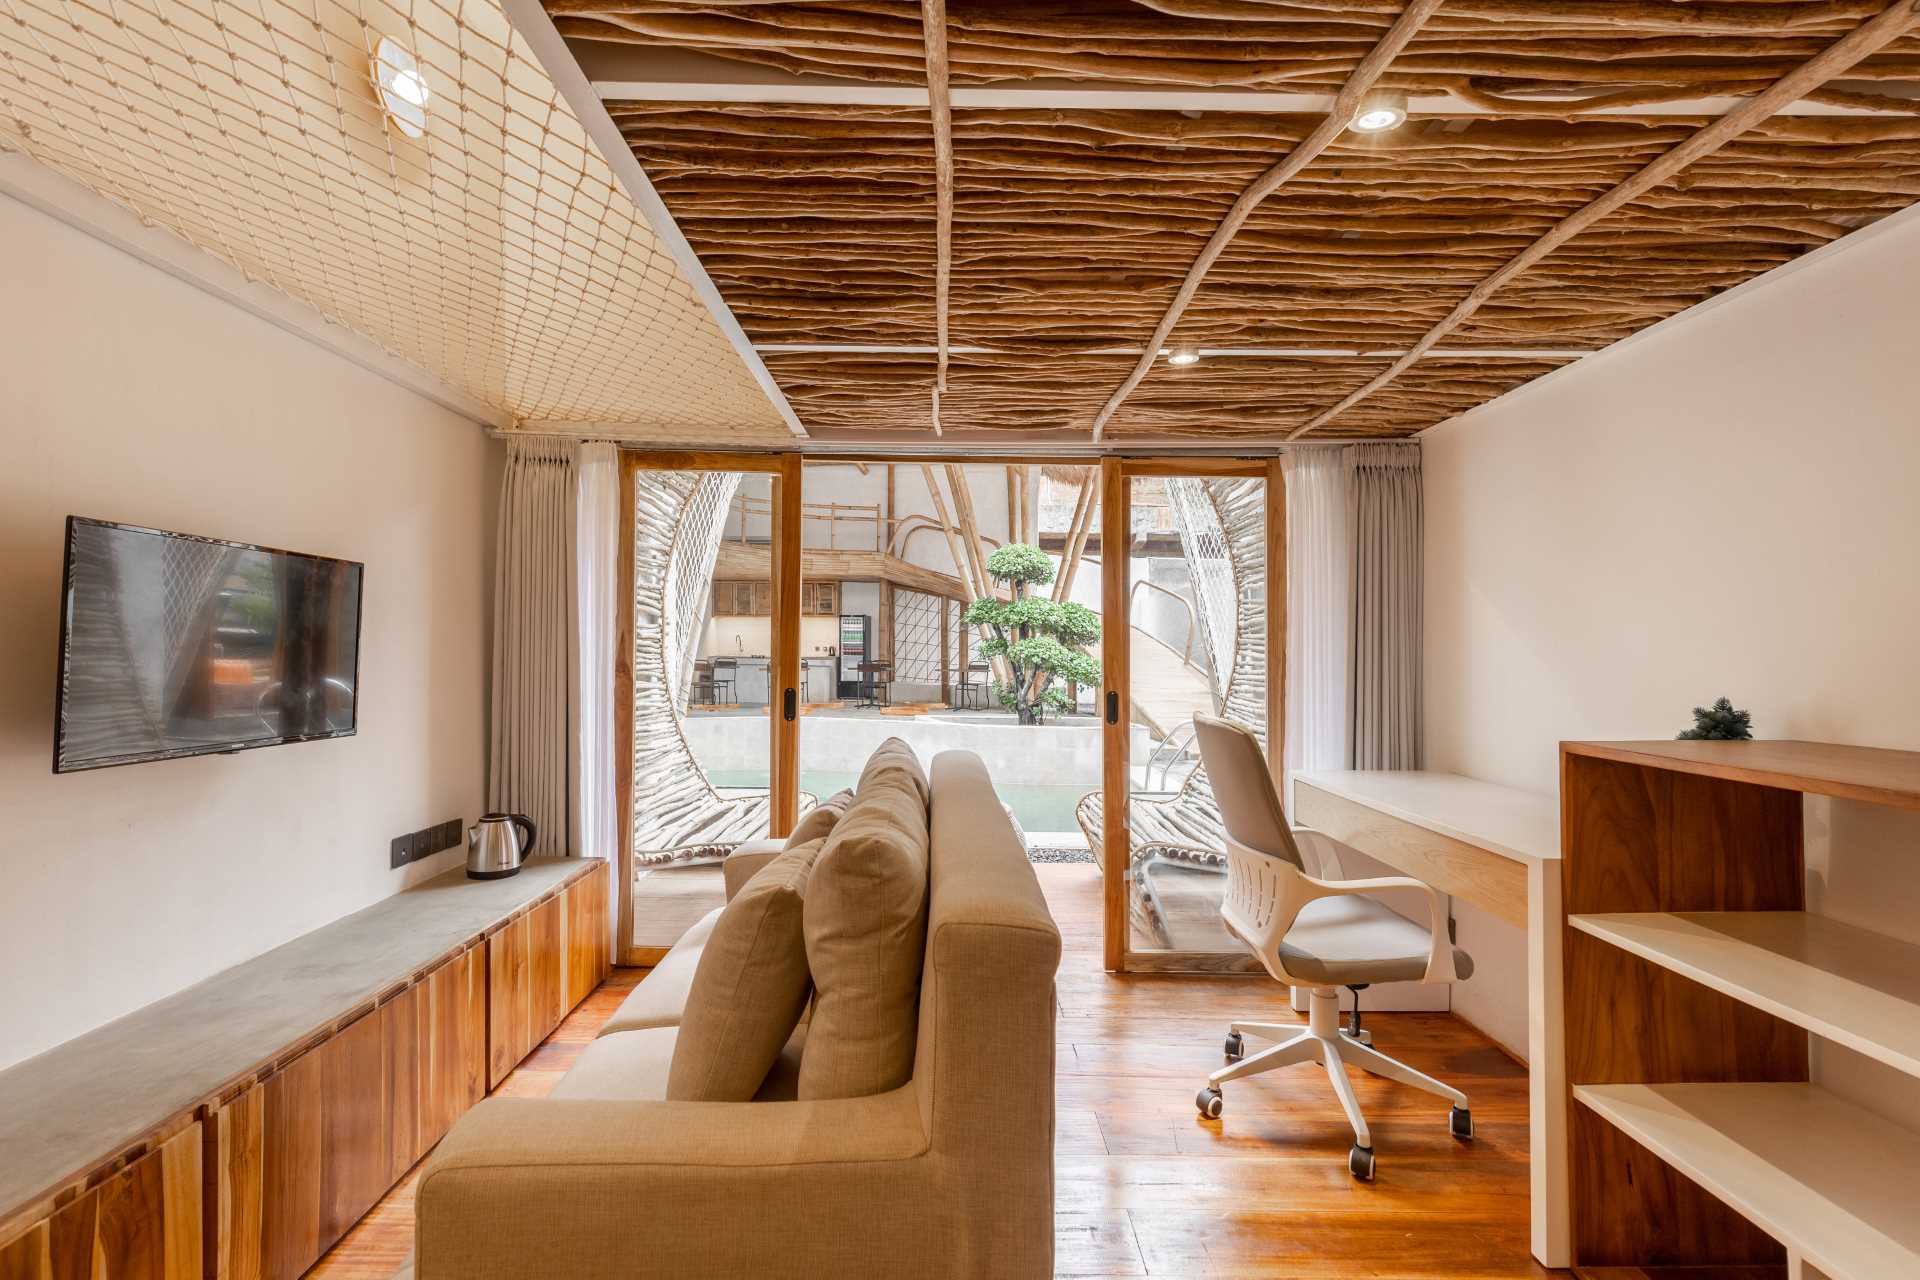 Built-in lounge seats made from coffee branches have been used to furnish the balcony on this micro-apartment.